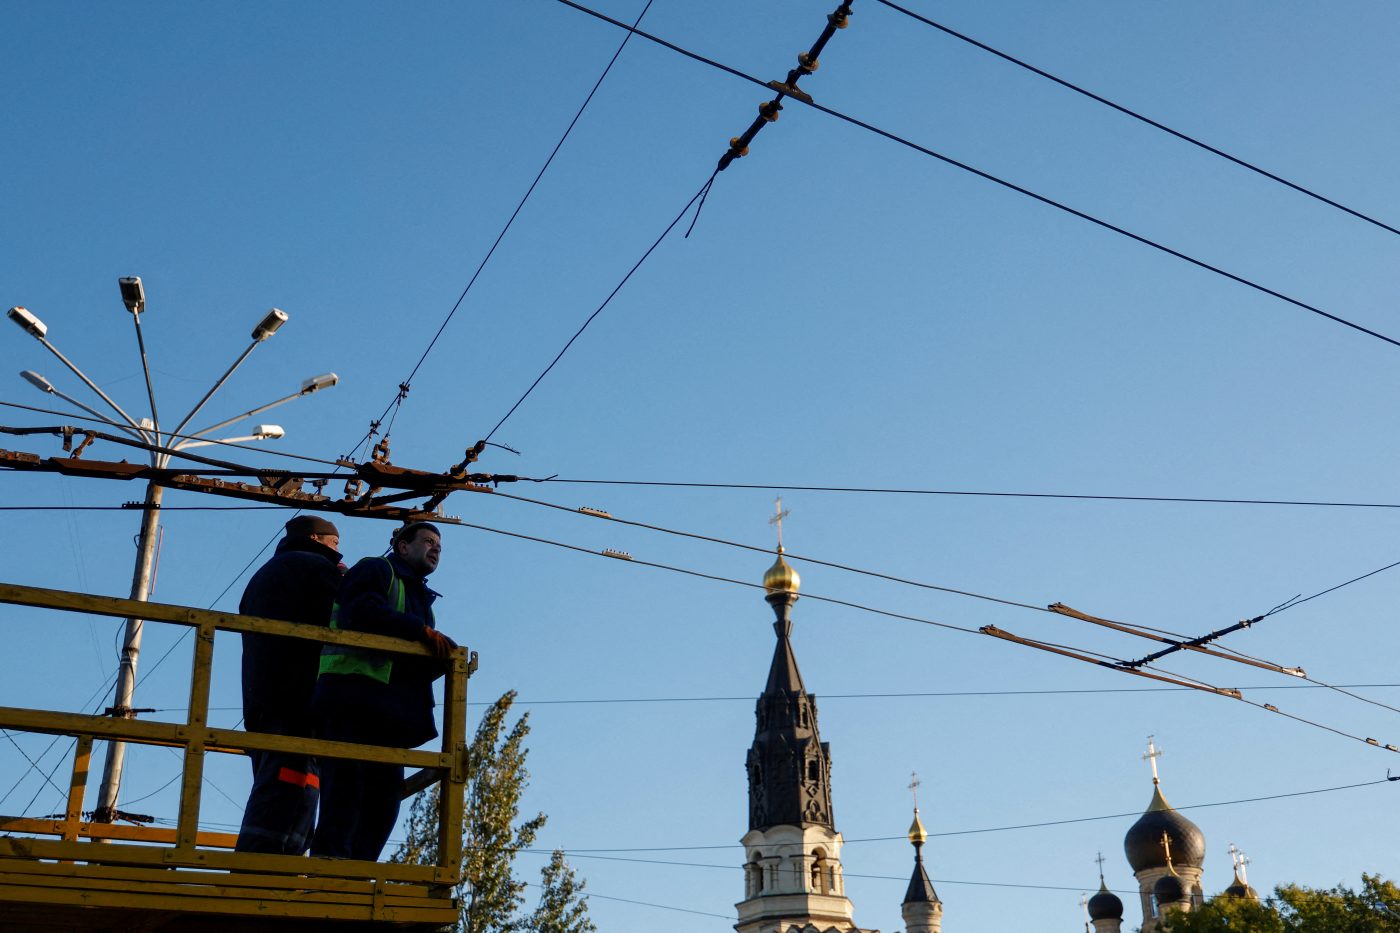 Photo: Municipal workers check an electricity network of public transport before possible energy outages, amid Russia's attack on Ukraine, in Mykolaiv, Ukraine October 20, 2022. Credit: REUTERS/Valentyn Ogirenko